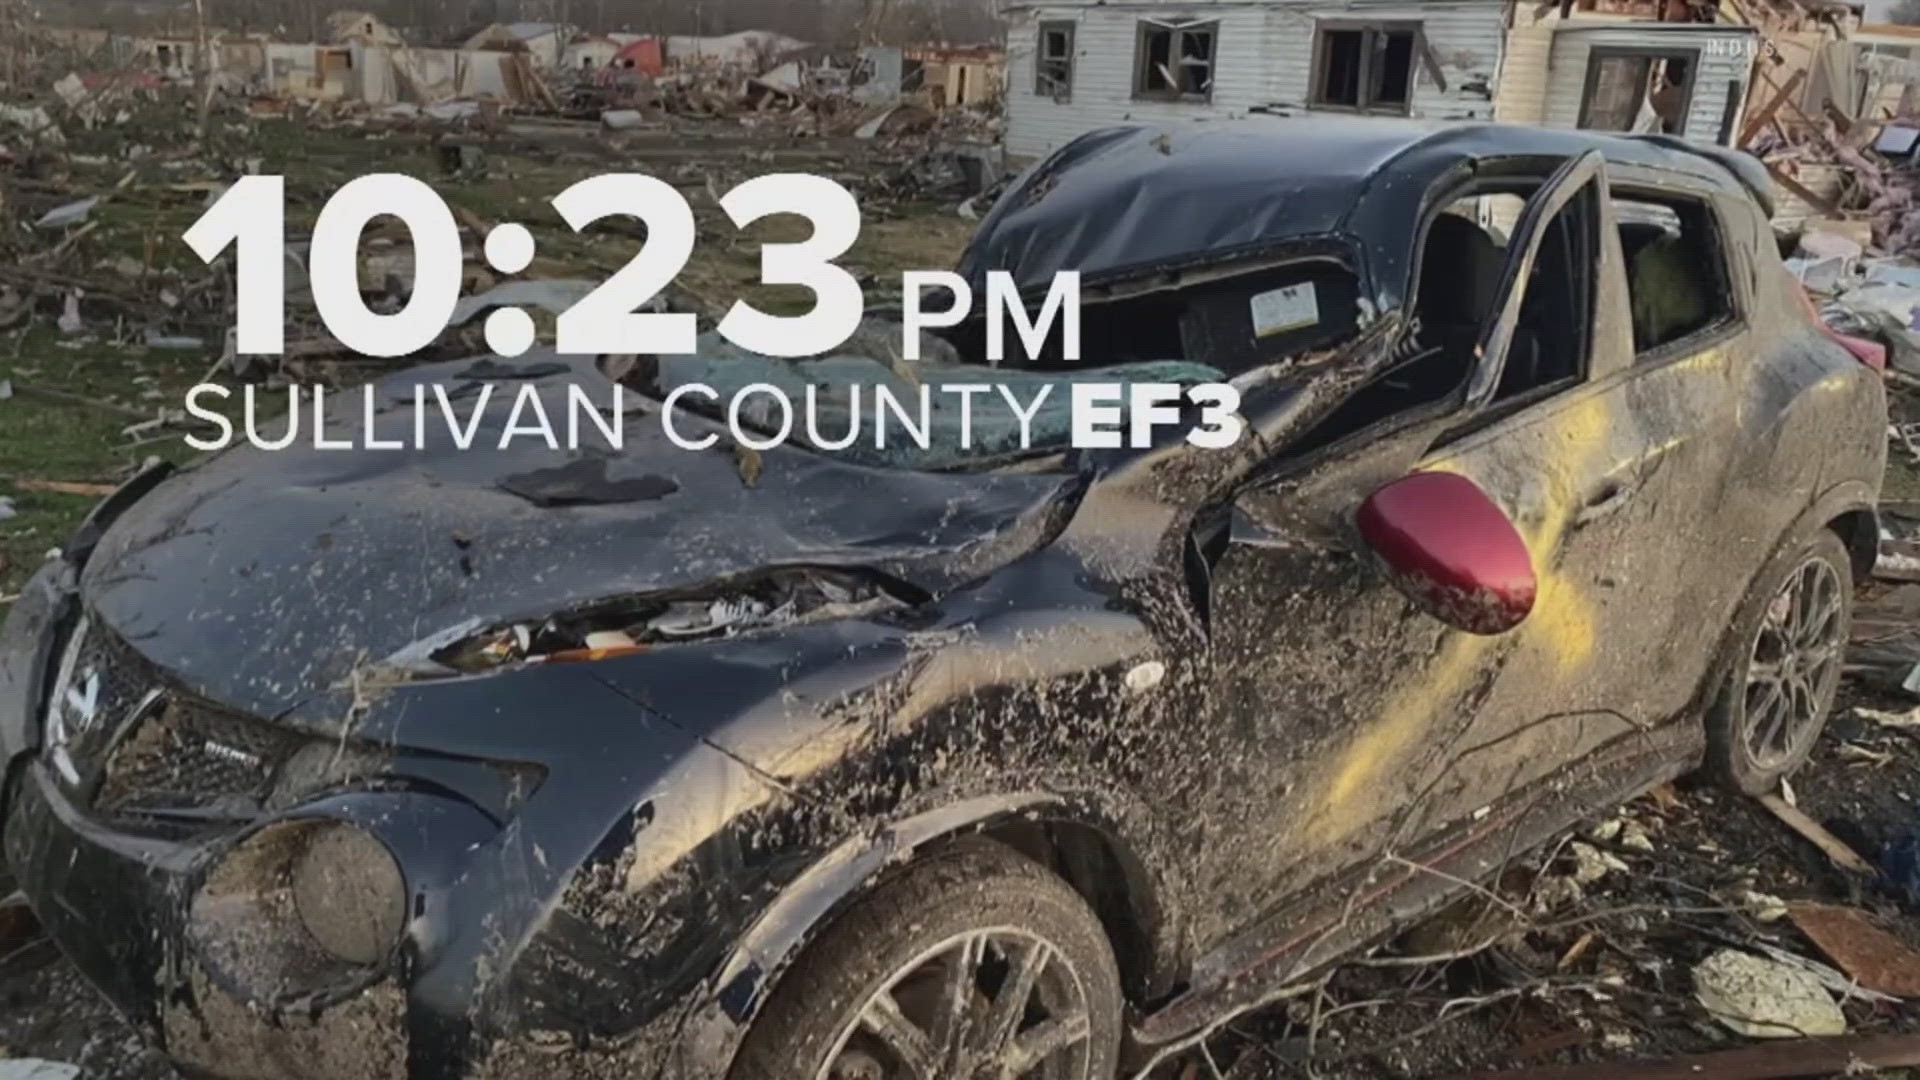 The first tornado touched down in Sullivan County at 10:23 p.m.